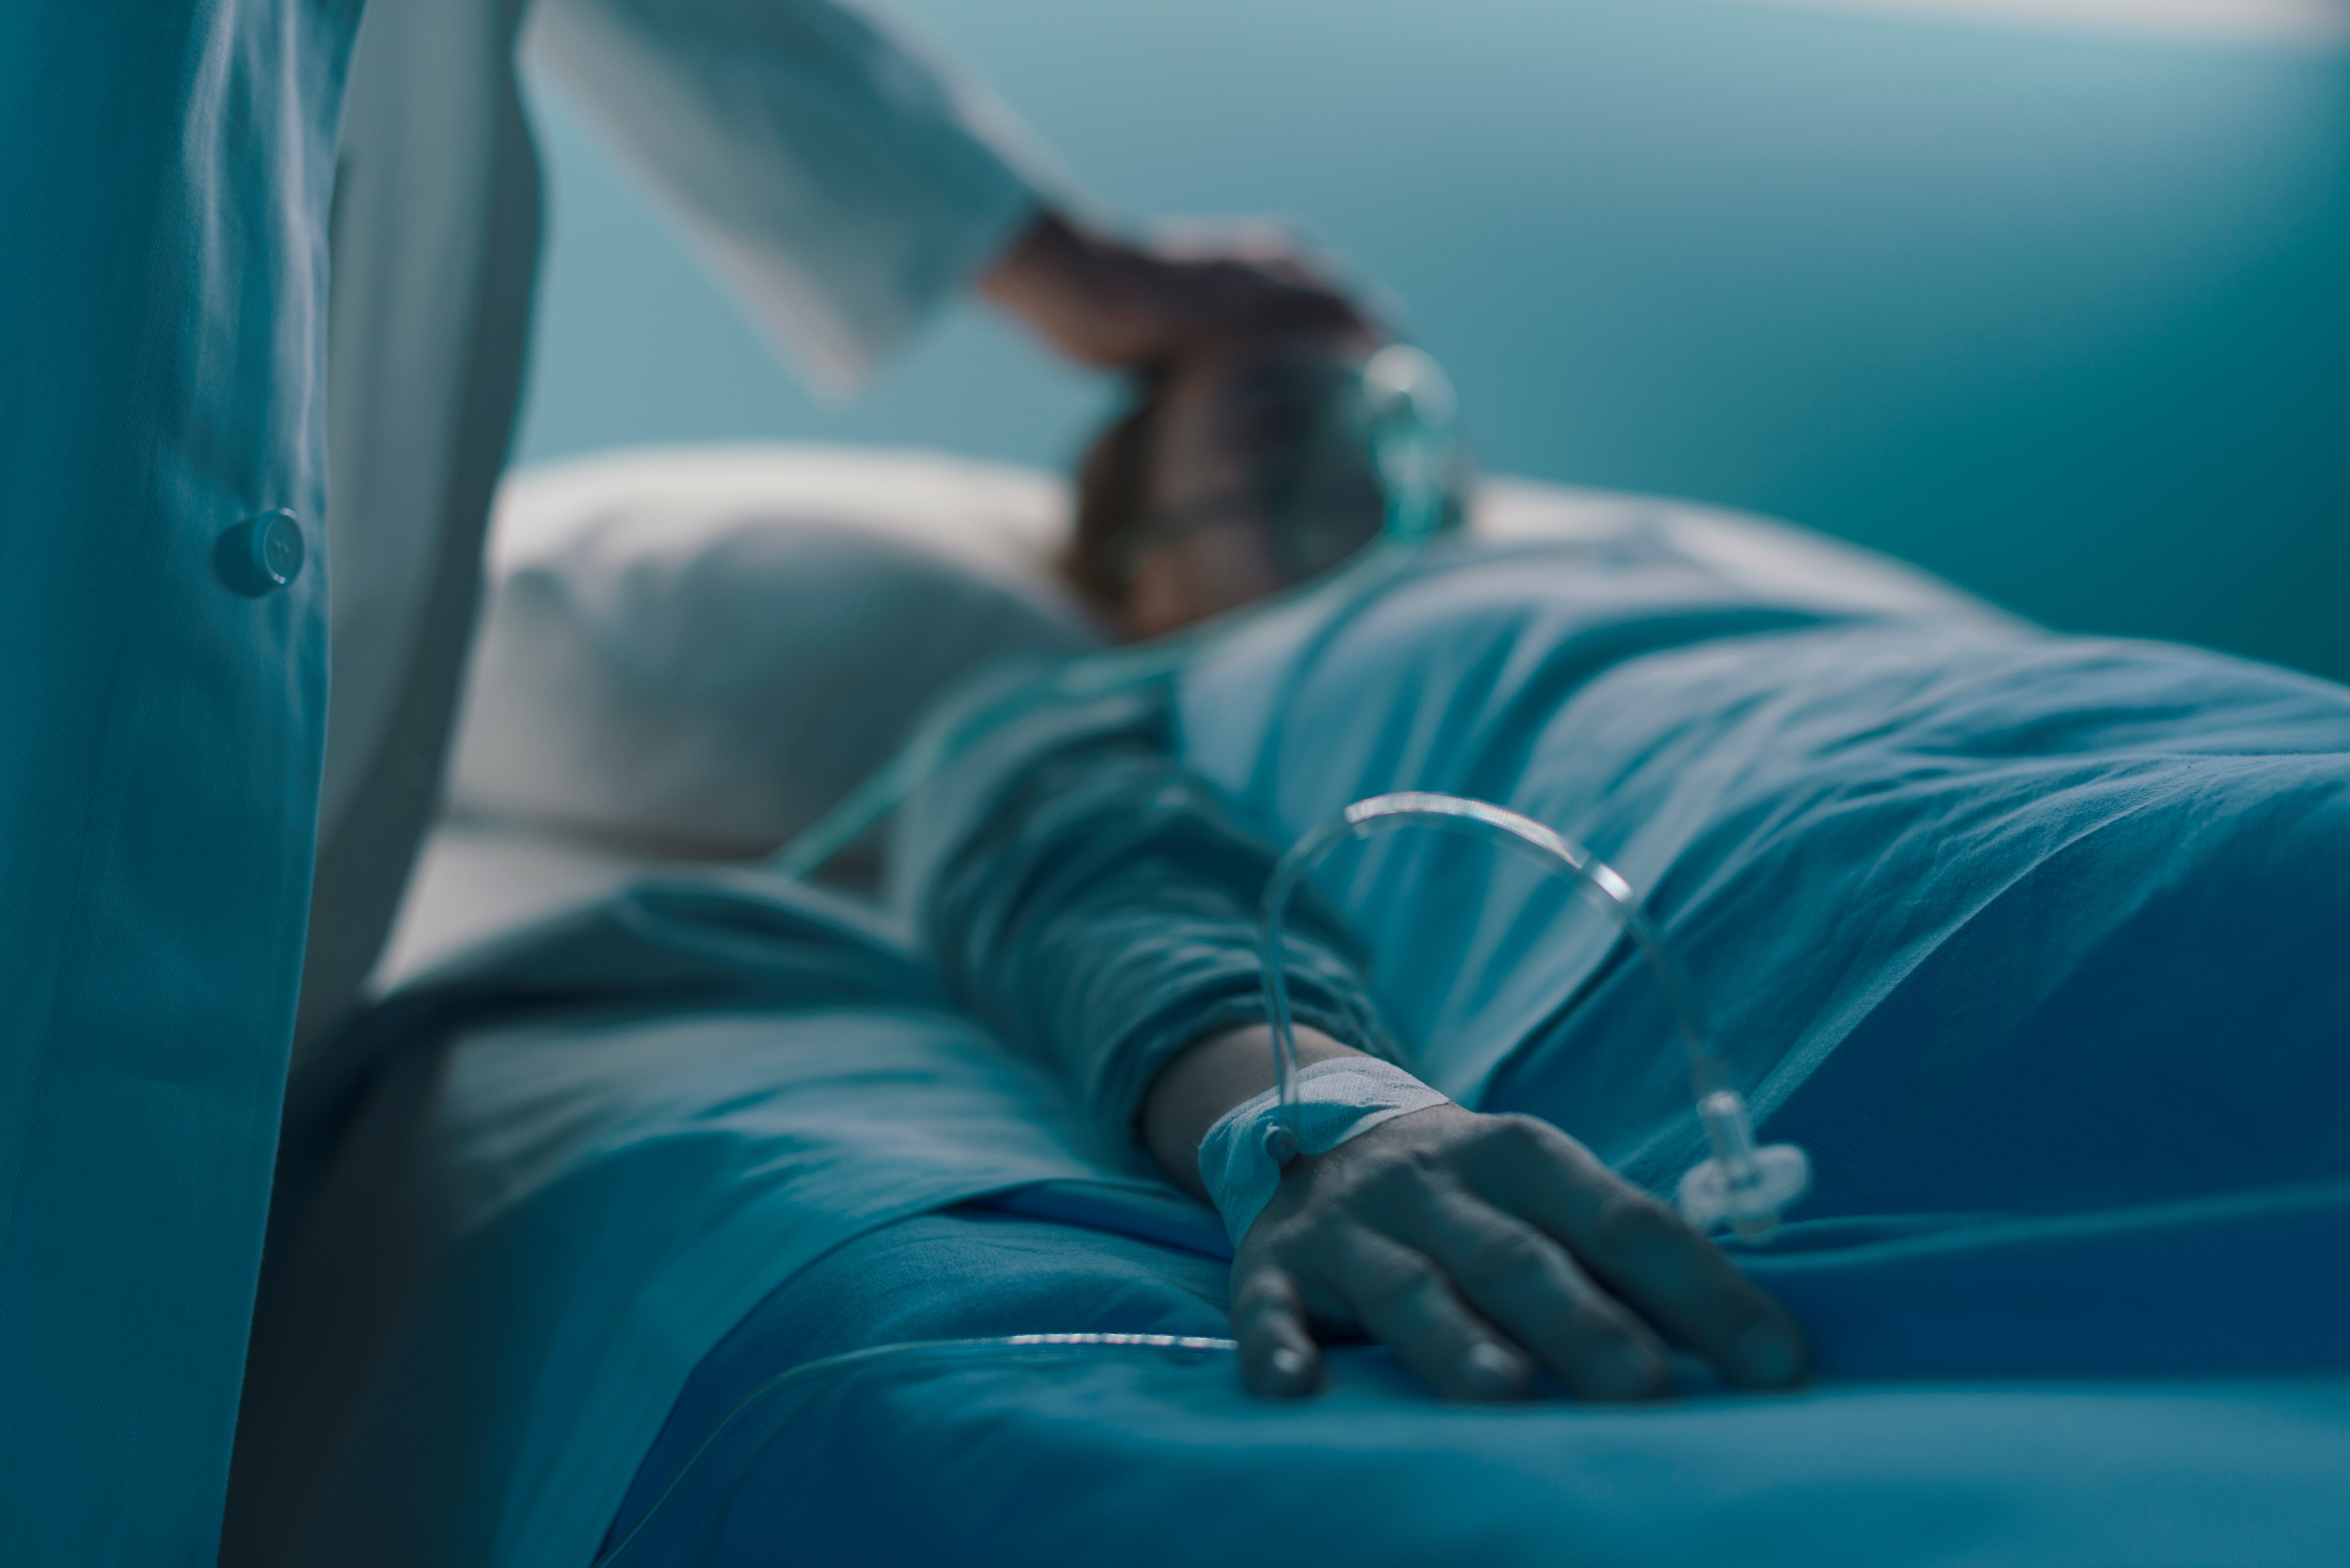 Patient lying in a hospital bed while a doctor is doing a check-up | Photo: Shutterstock/Stokkete